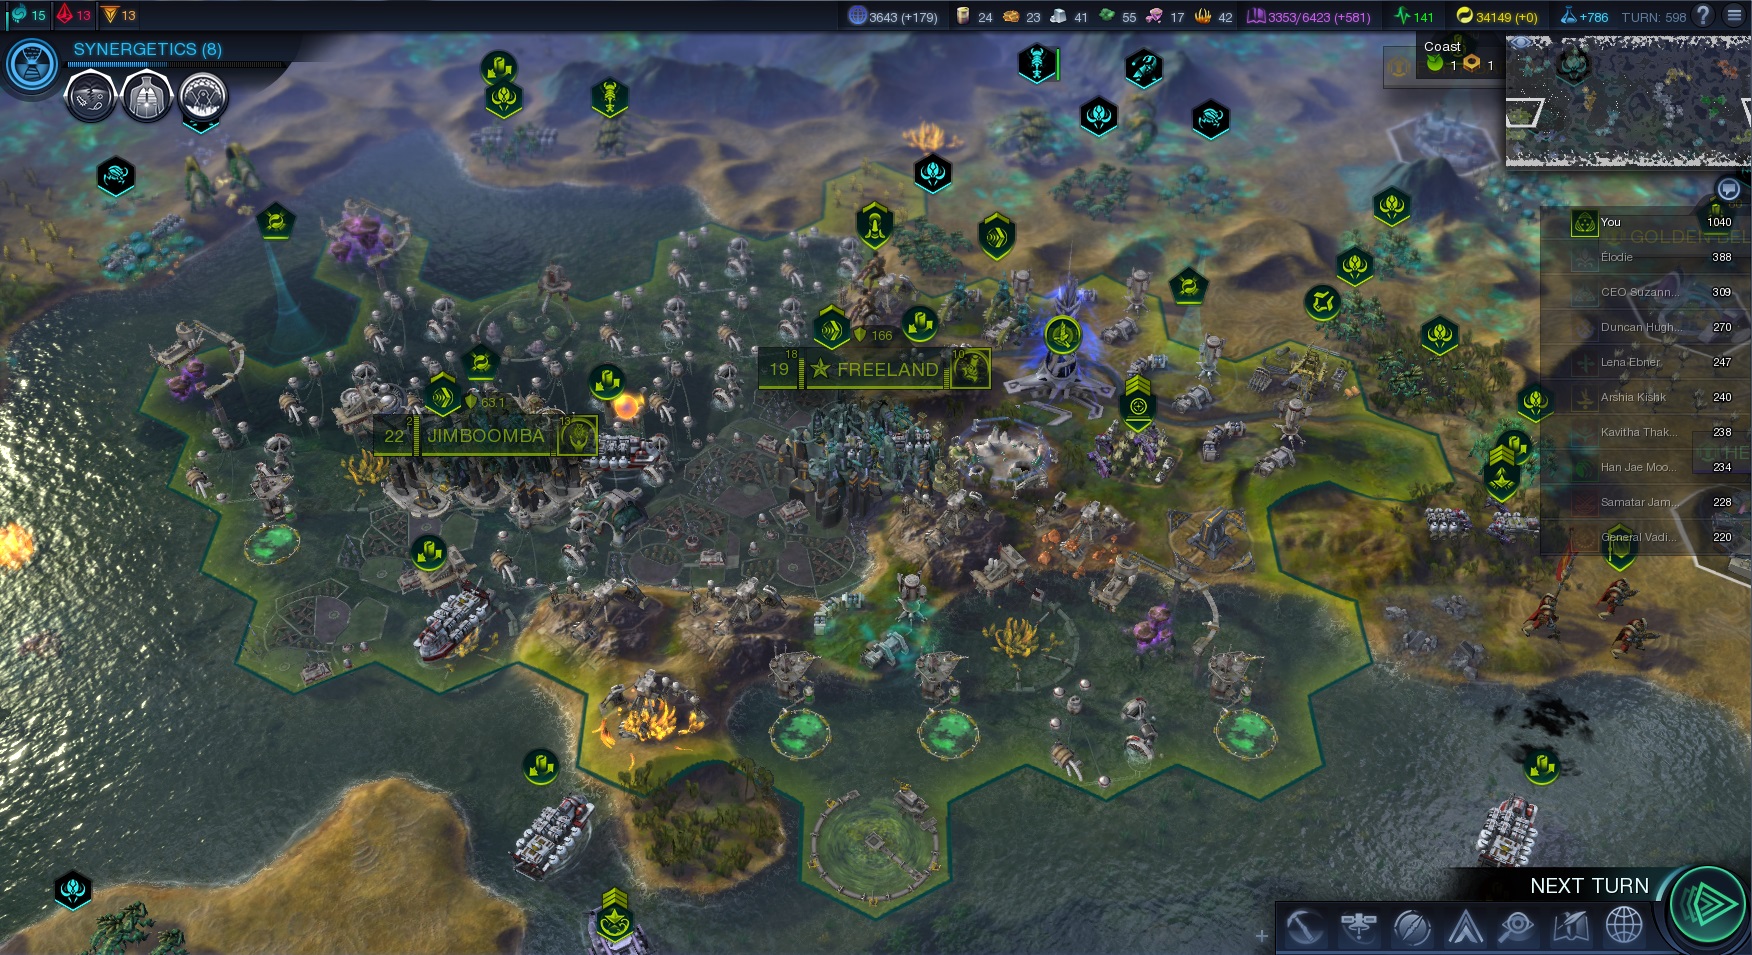 Sid Meier's Civilization: Beyond Earth High Quality Background on Wallpapers Vista